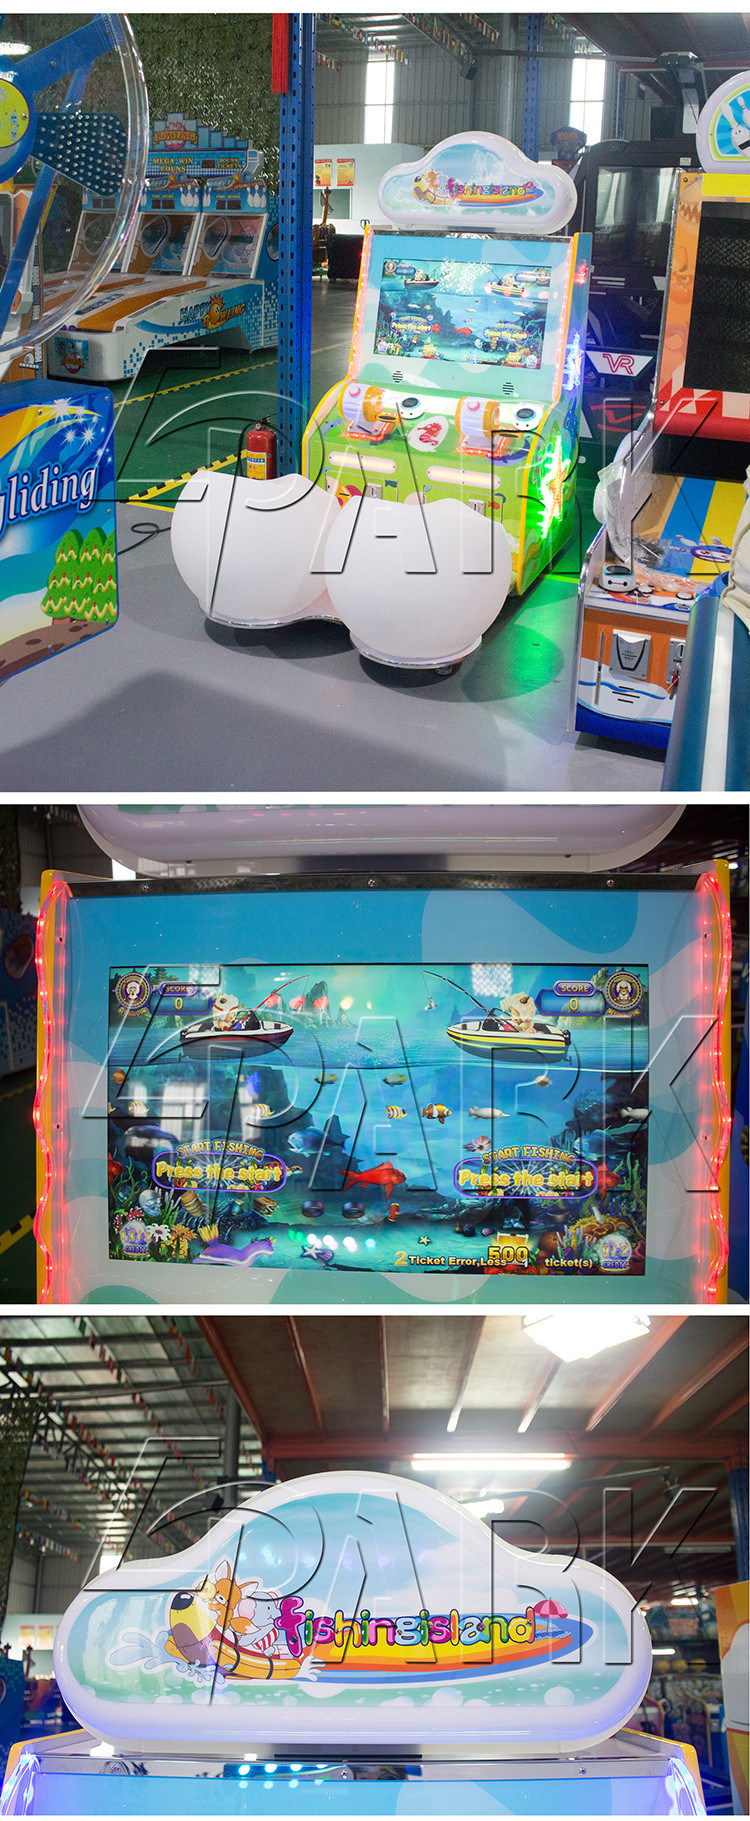 Funny Amusement Arcade Fishing Game Machine for 2 Players